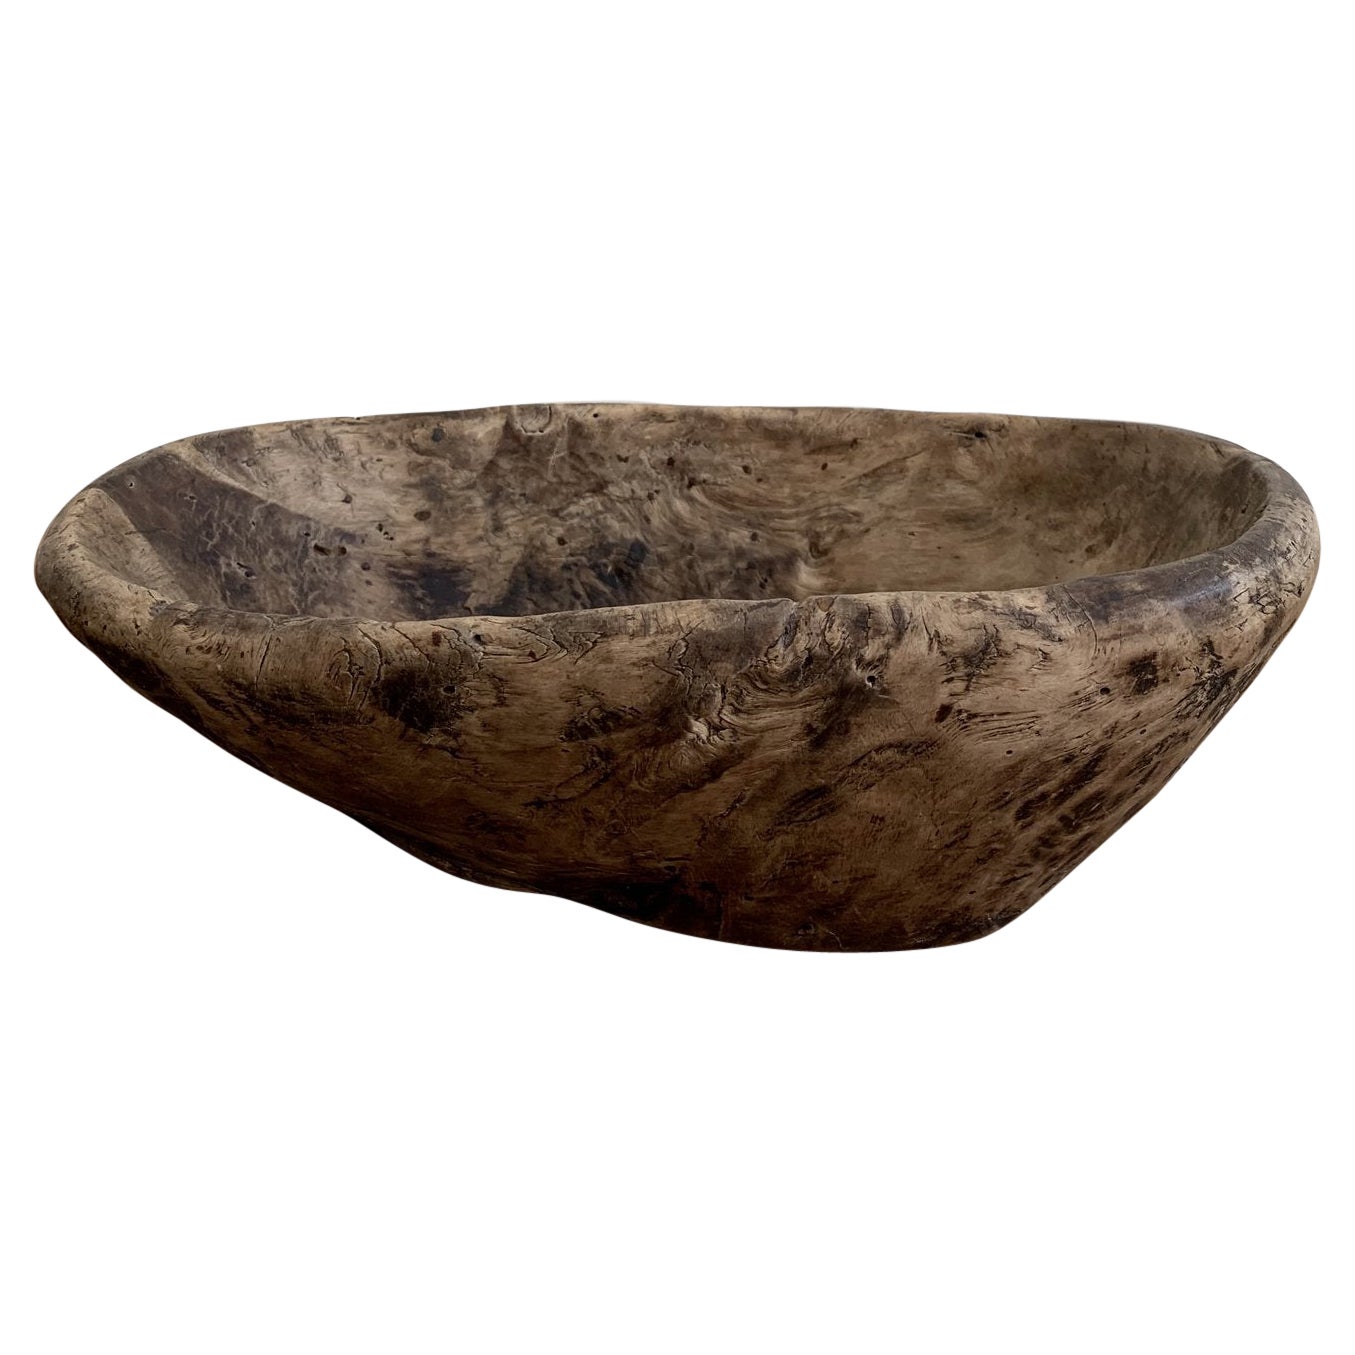 Swedish Wooden Root Bowl in a Brutalist and Wabi Sabi Style, Early 1800s